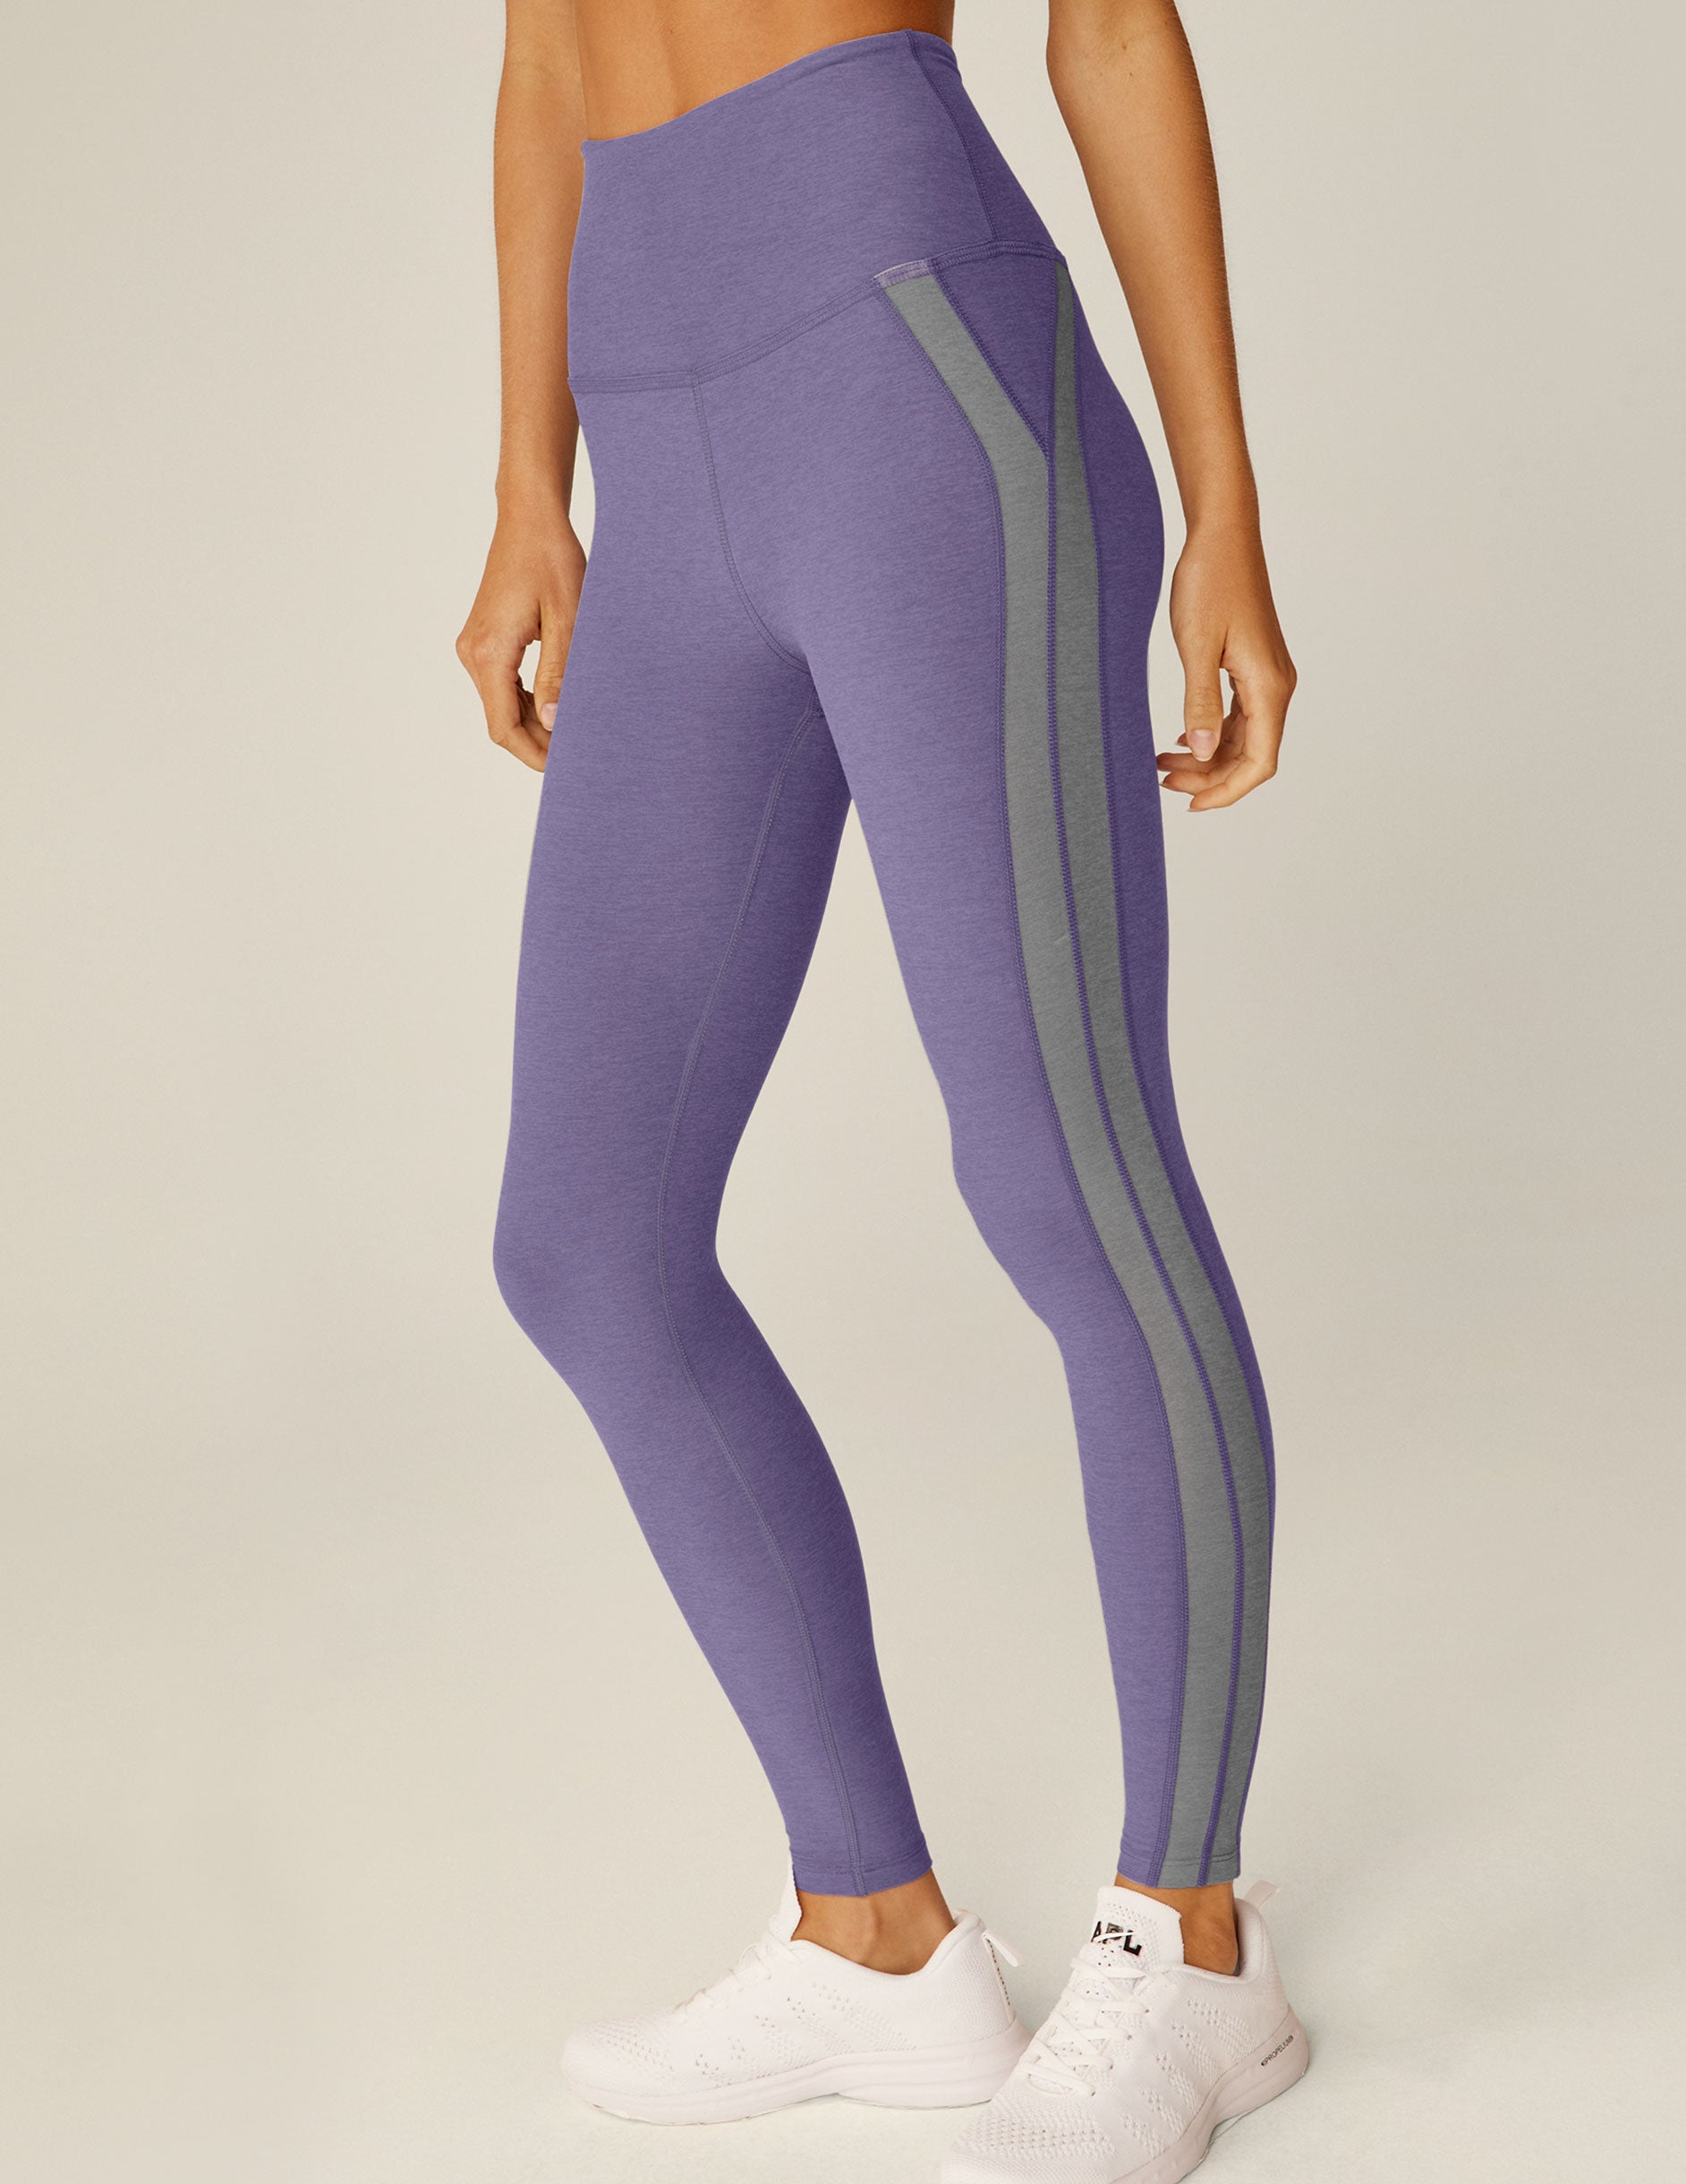 purple high-waisted midi leggings with gray trim down the side. 